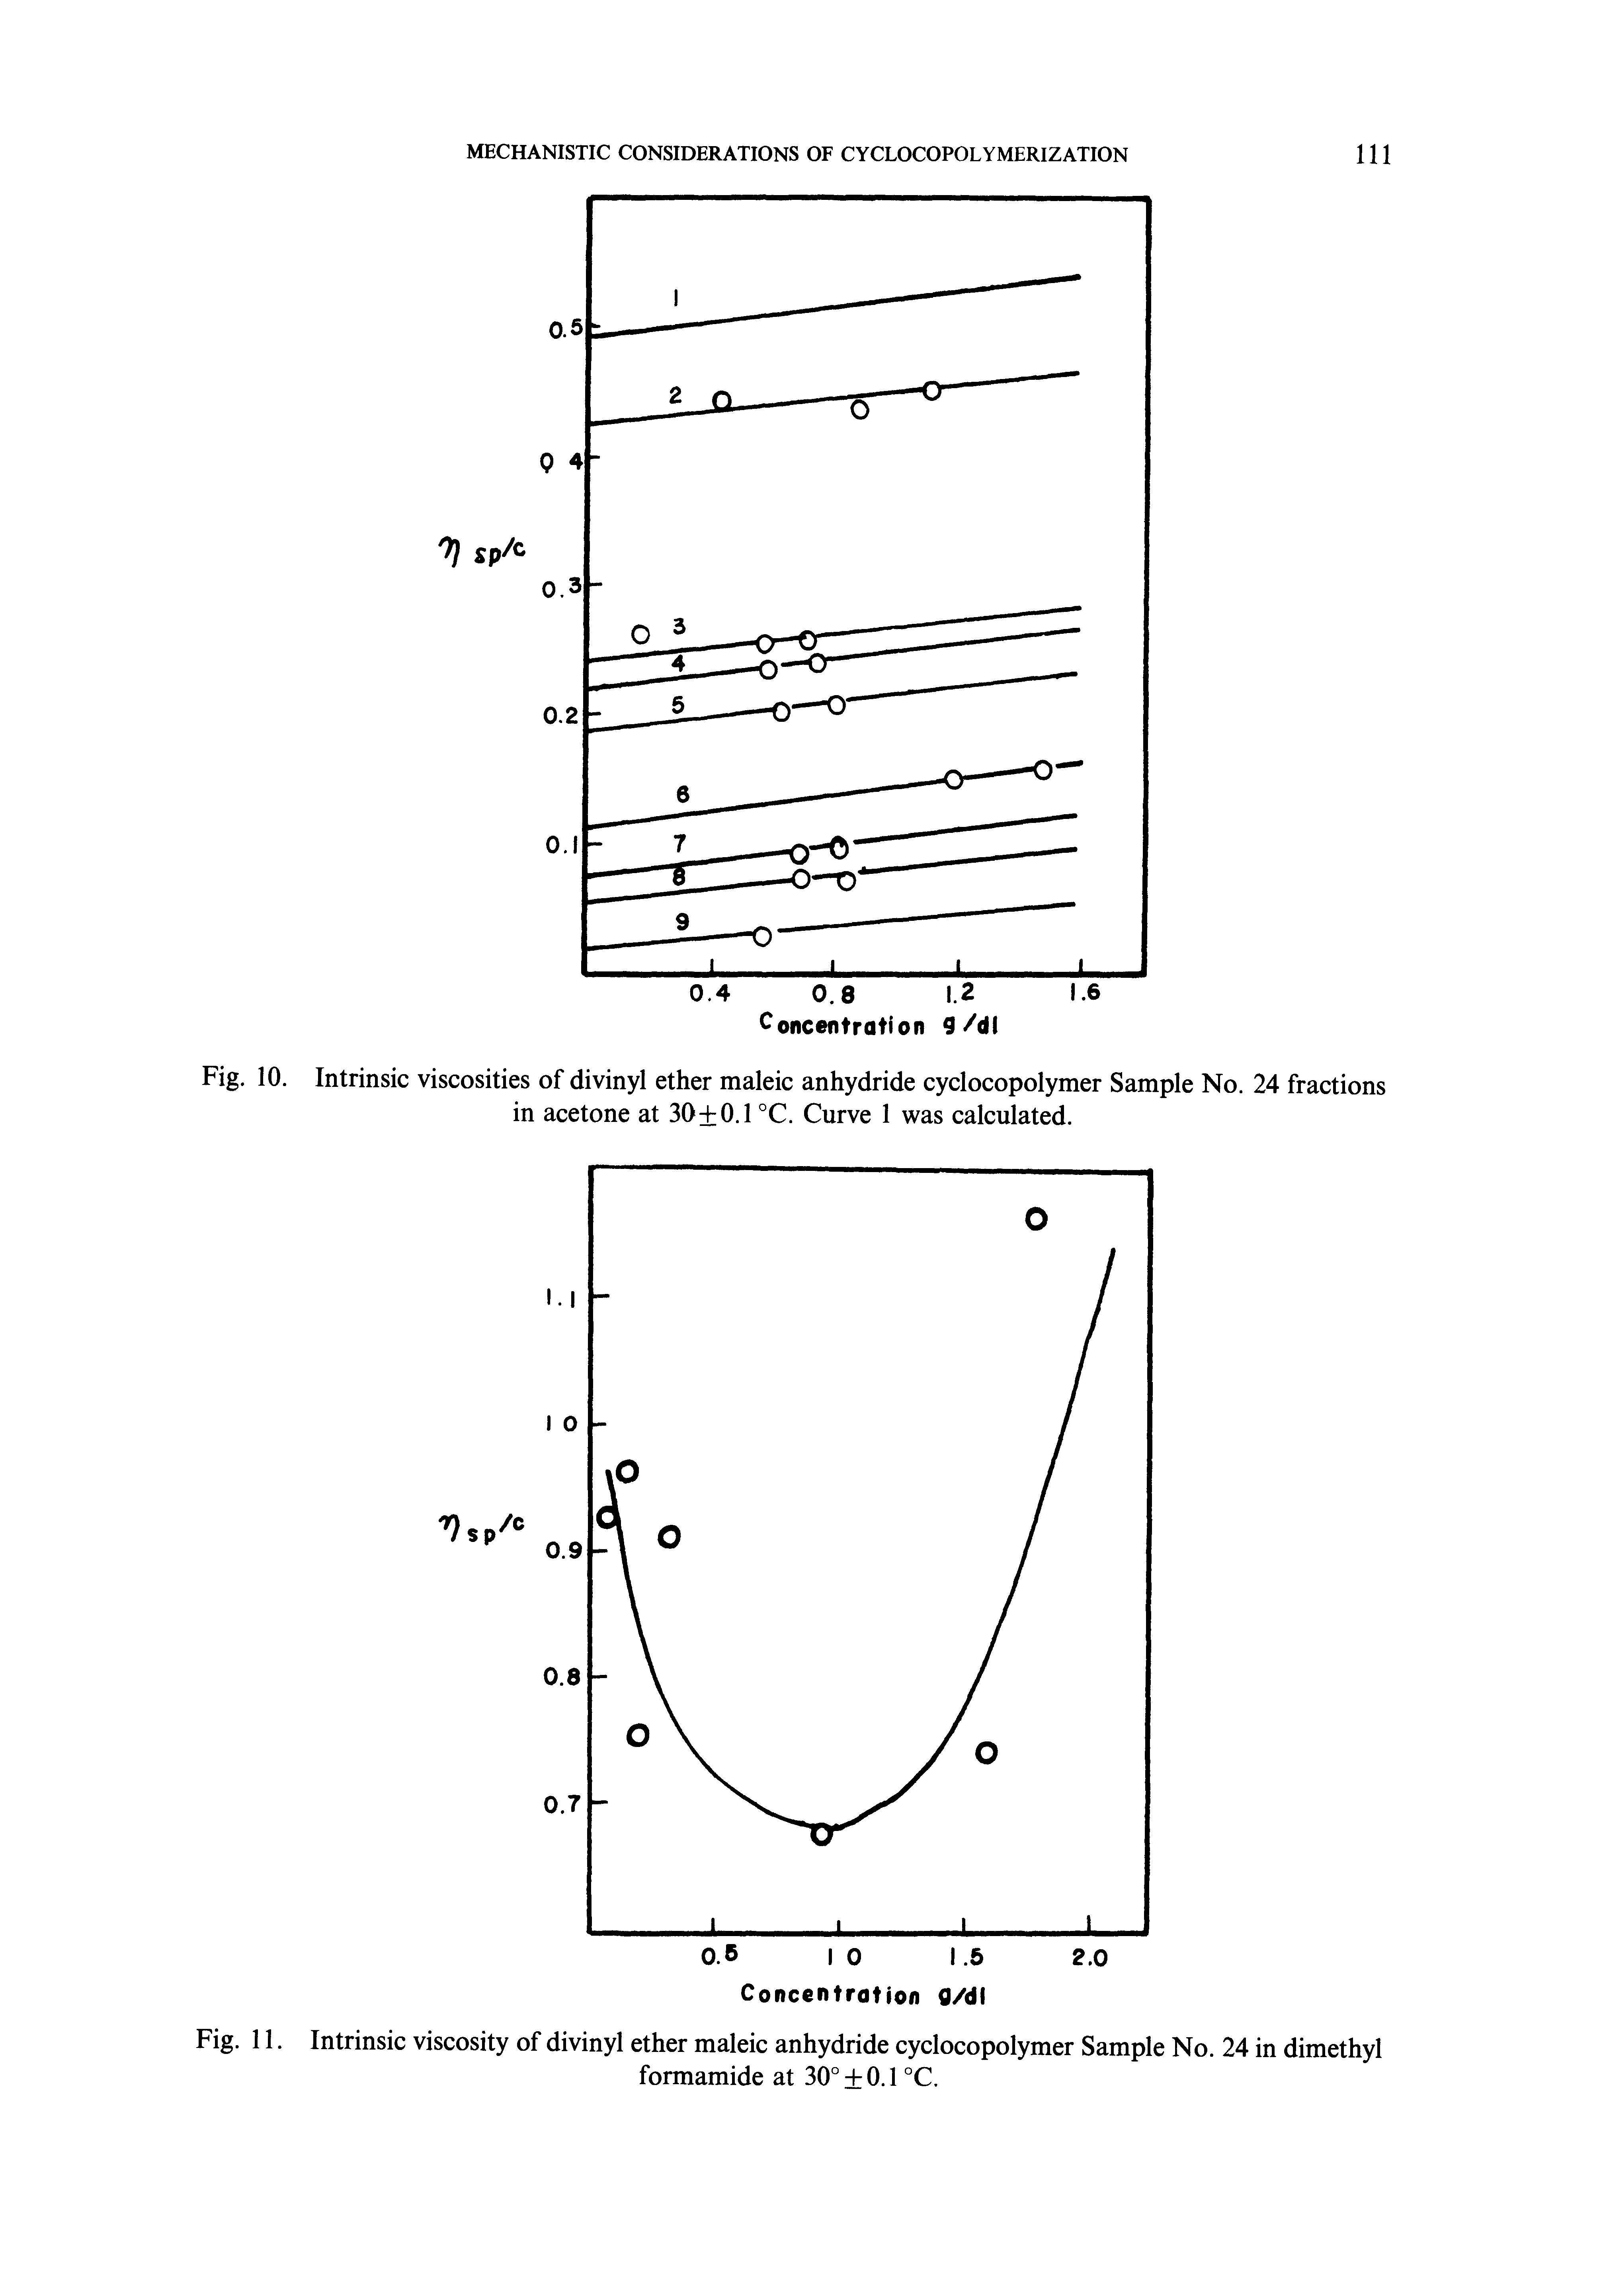 Fig. 10. Intrinsic viscosities of divinyl ether maleic anhydride cyclocopolymer Sample No. 24 fractions in acetone at 30+0.1 °C. Curve 1 was calculated.